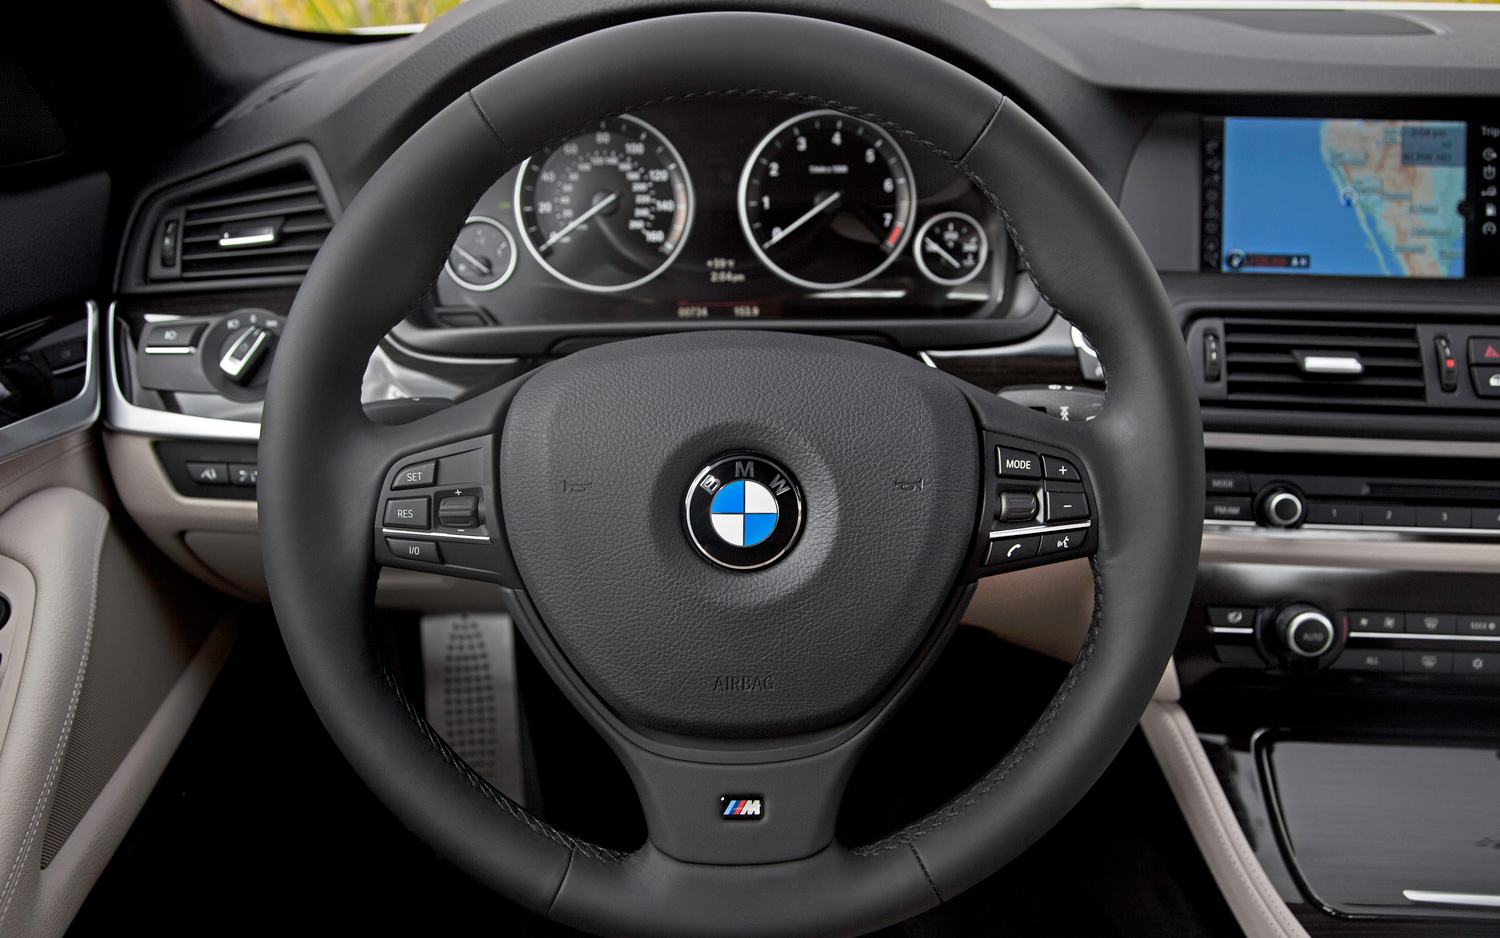 How to clean your steering wheel?